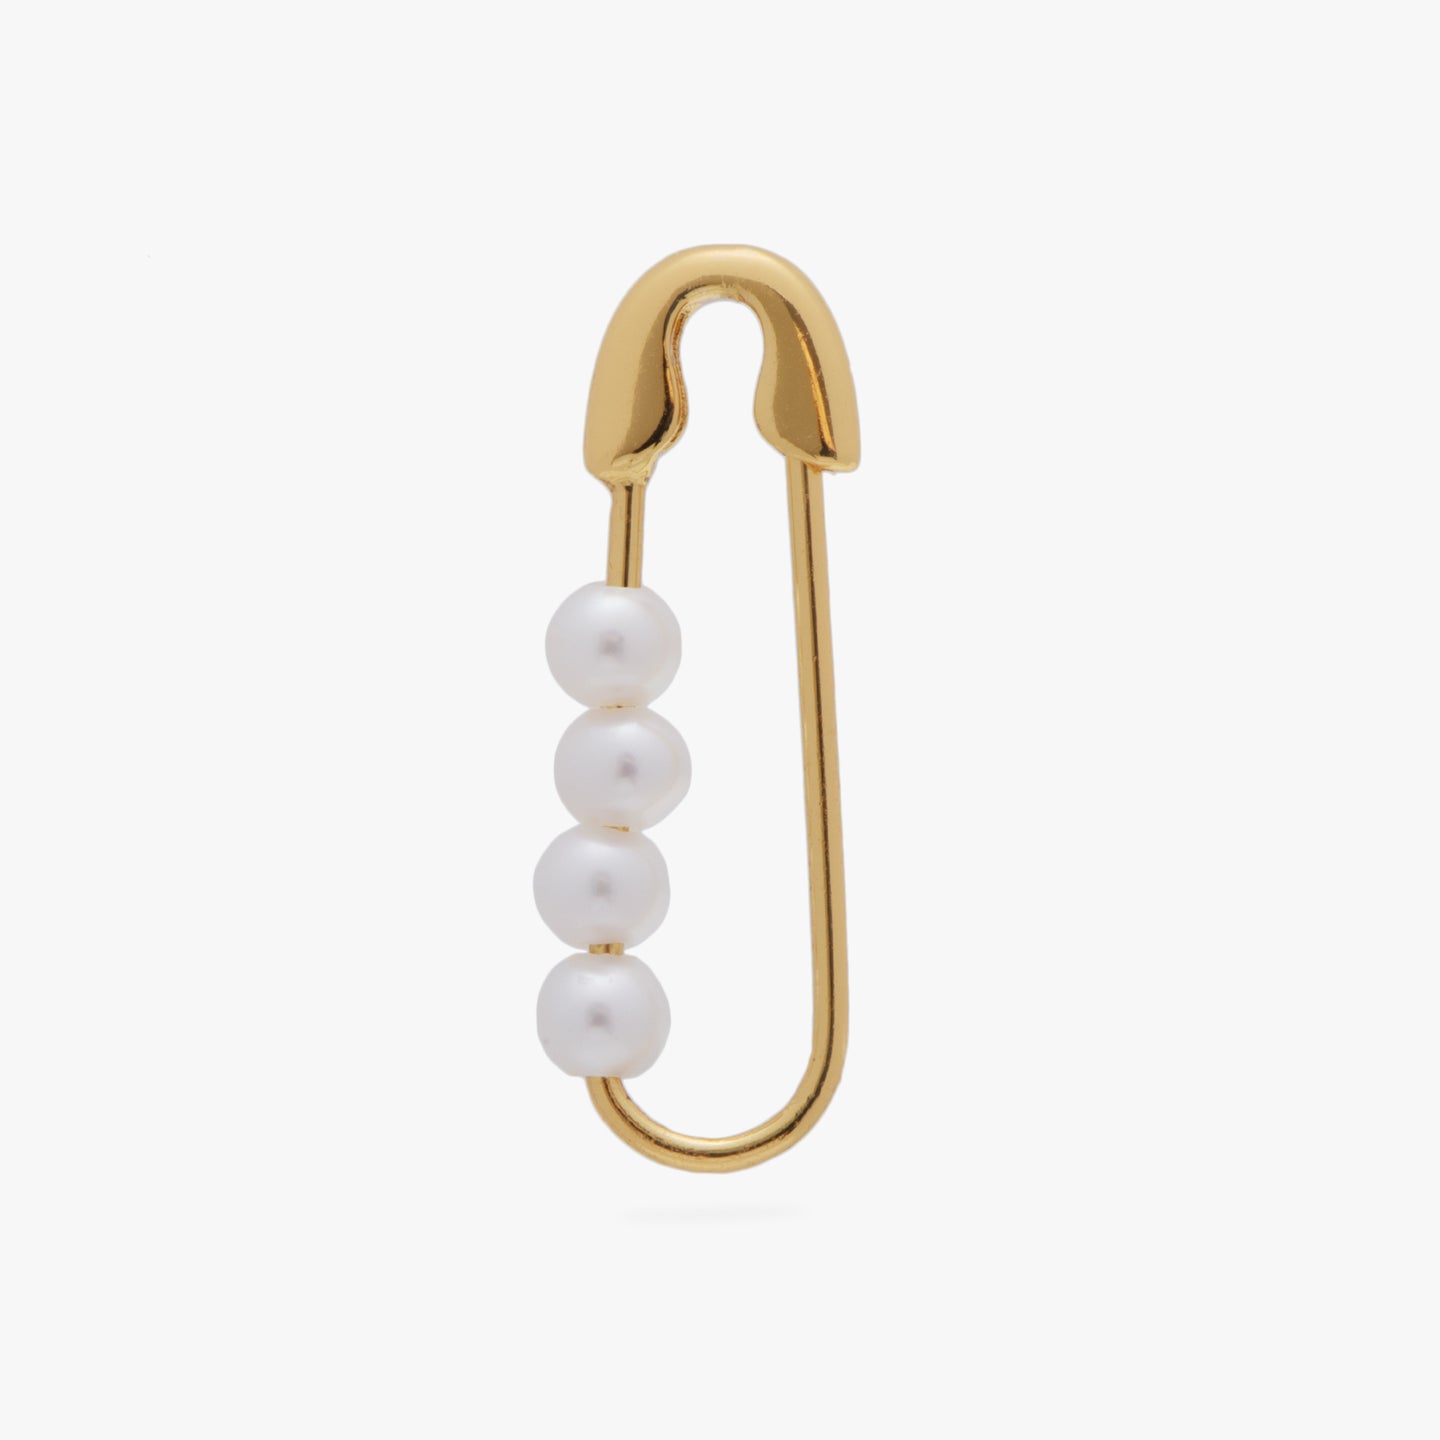 This is a small gold safety pin earring with pearl accents color:null|gold / gold|gold